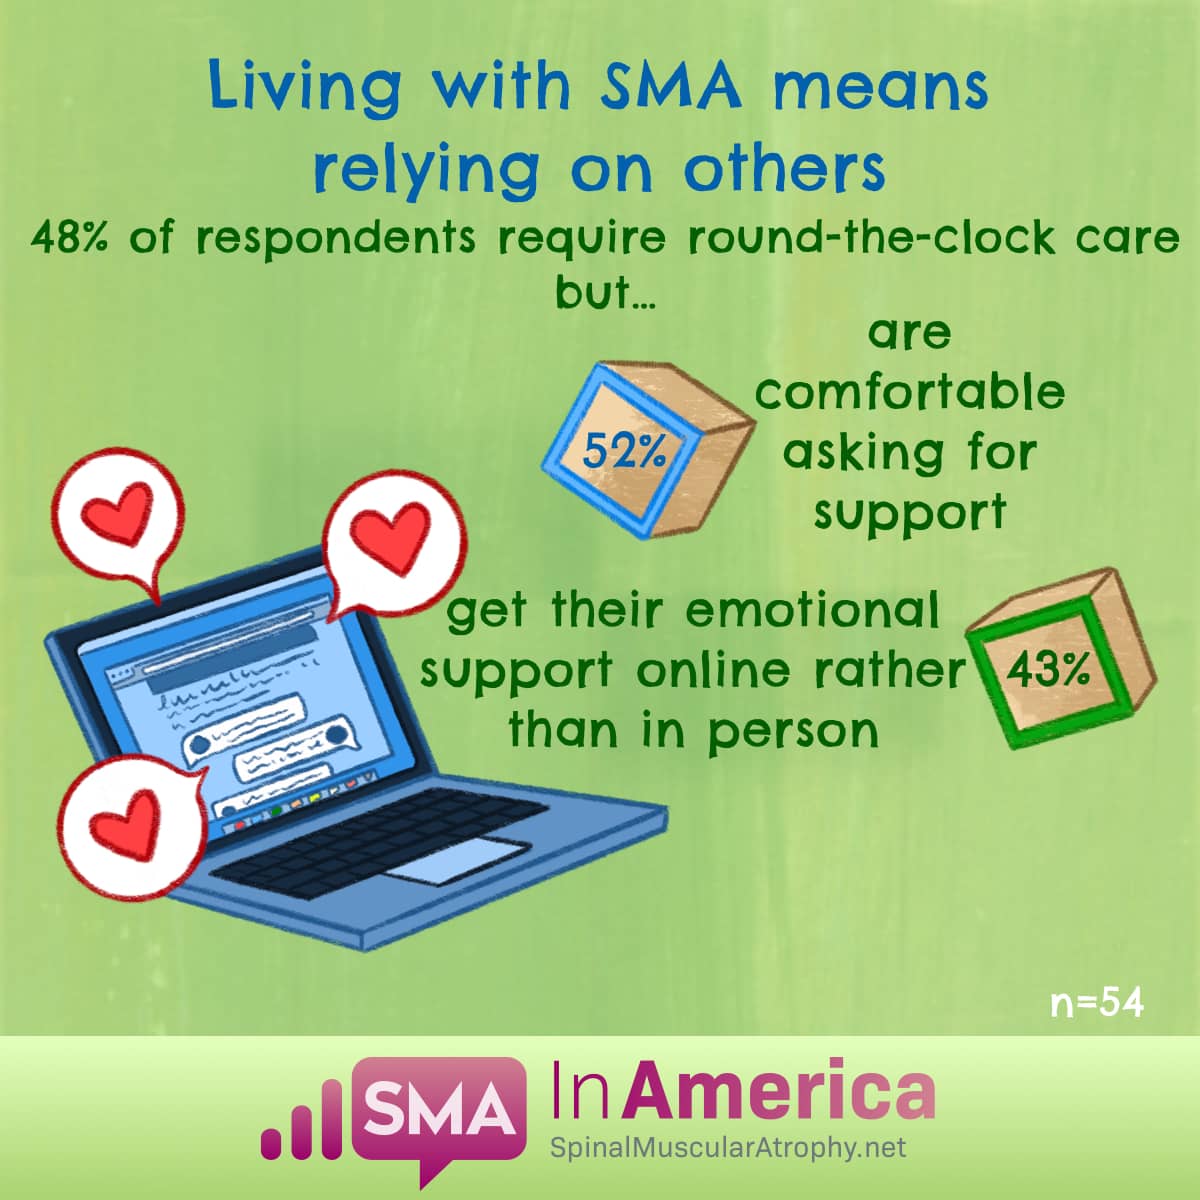 SMA survey respondents: 48% need round-the-clock care, 52% comfortable asking for support, 43% prefer online social support.